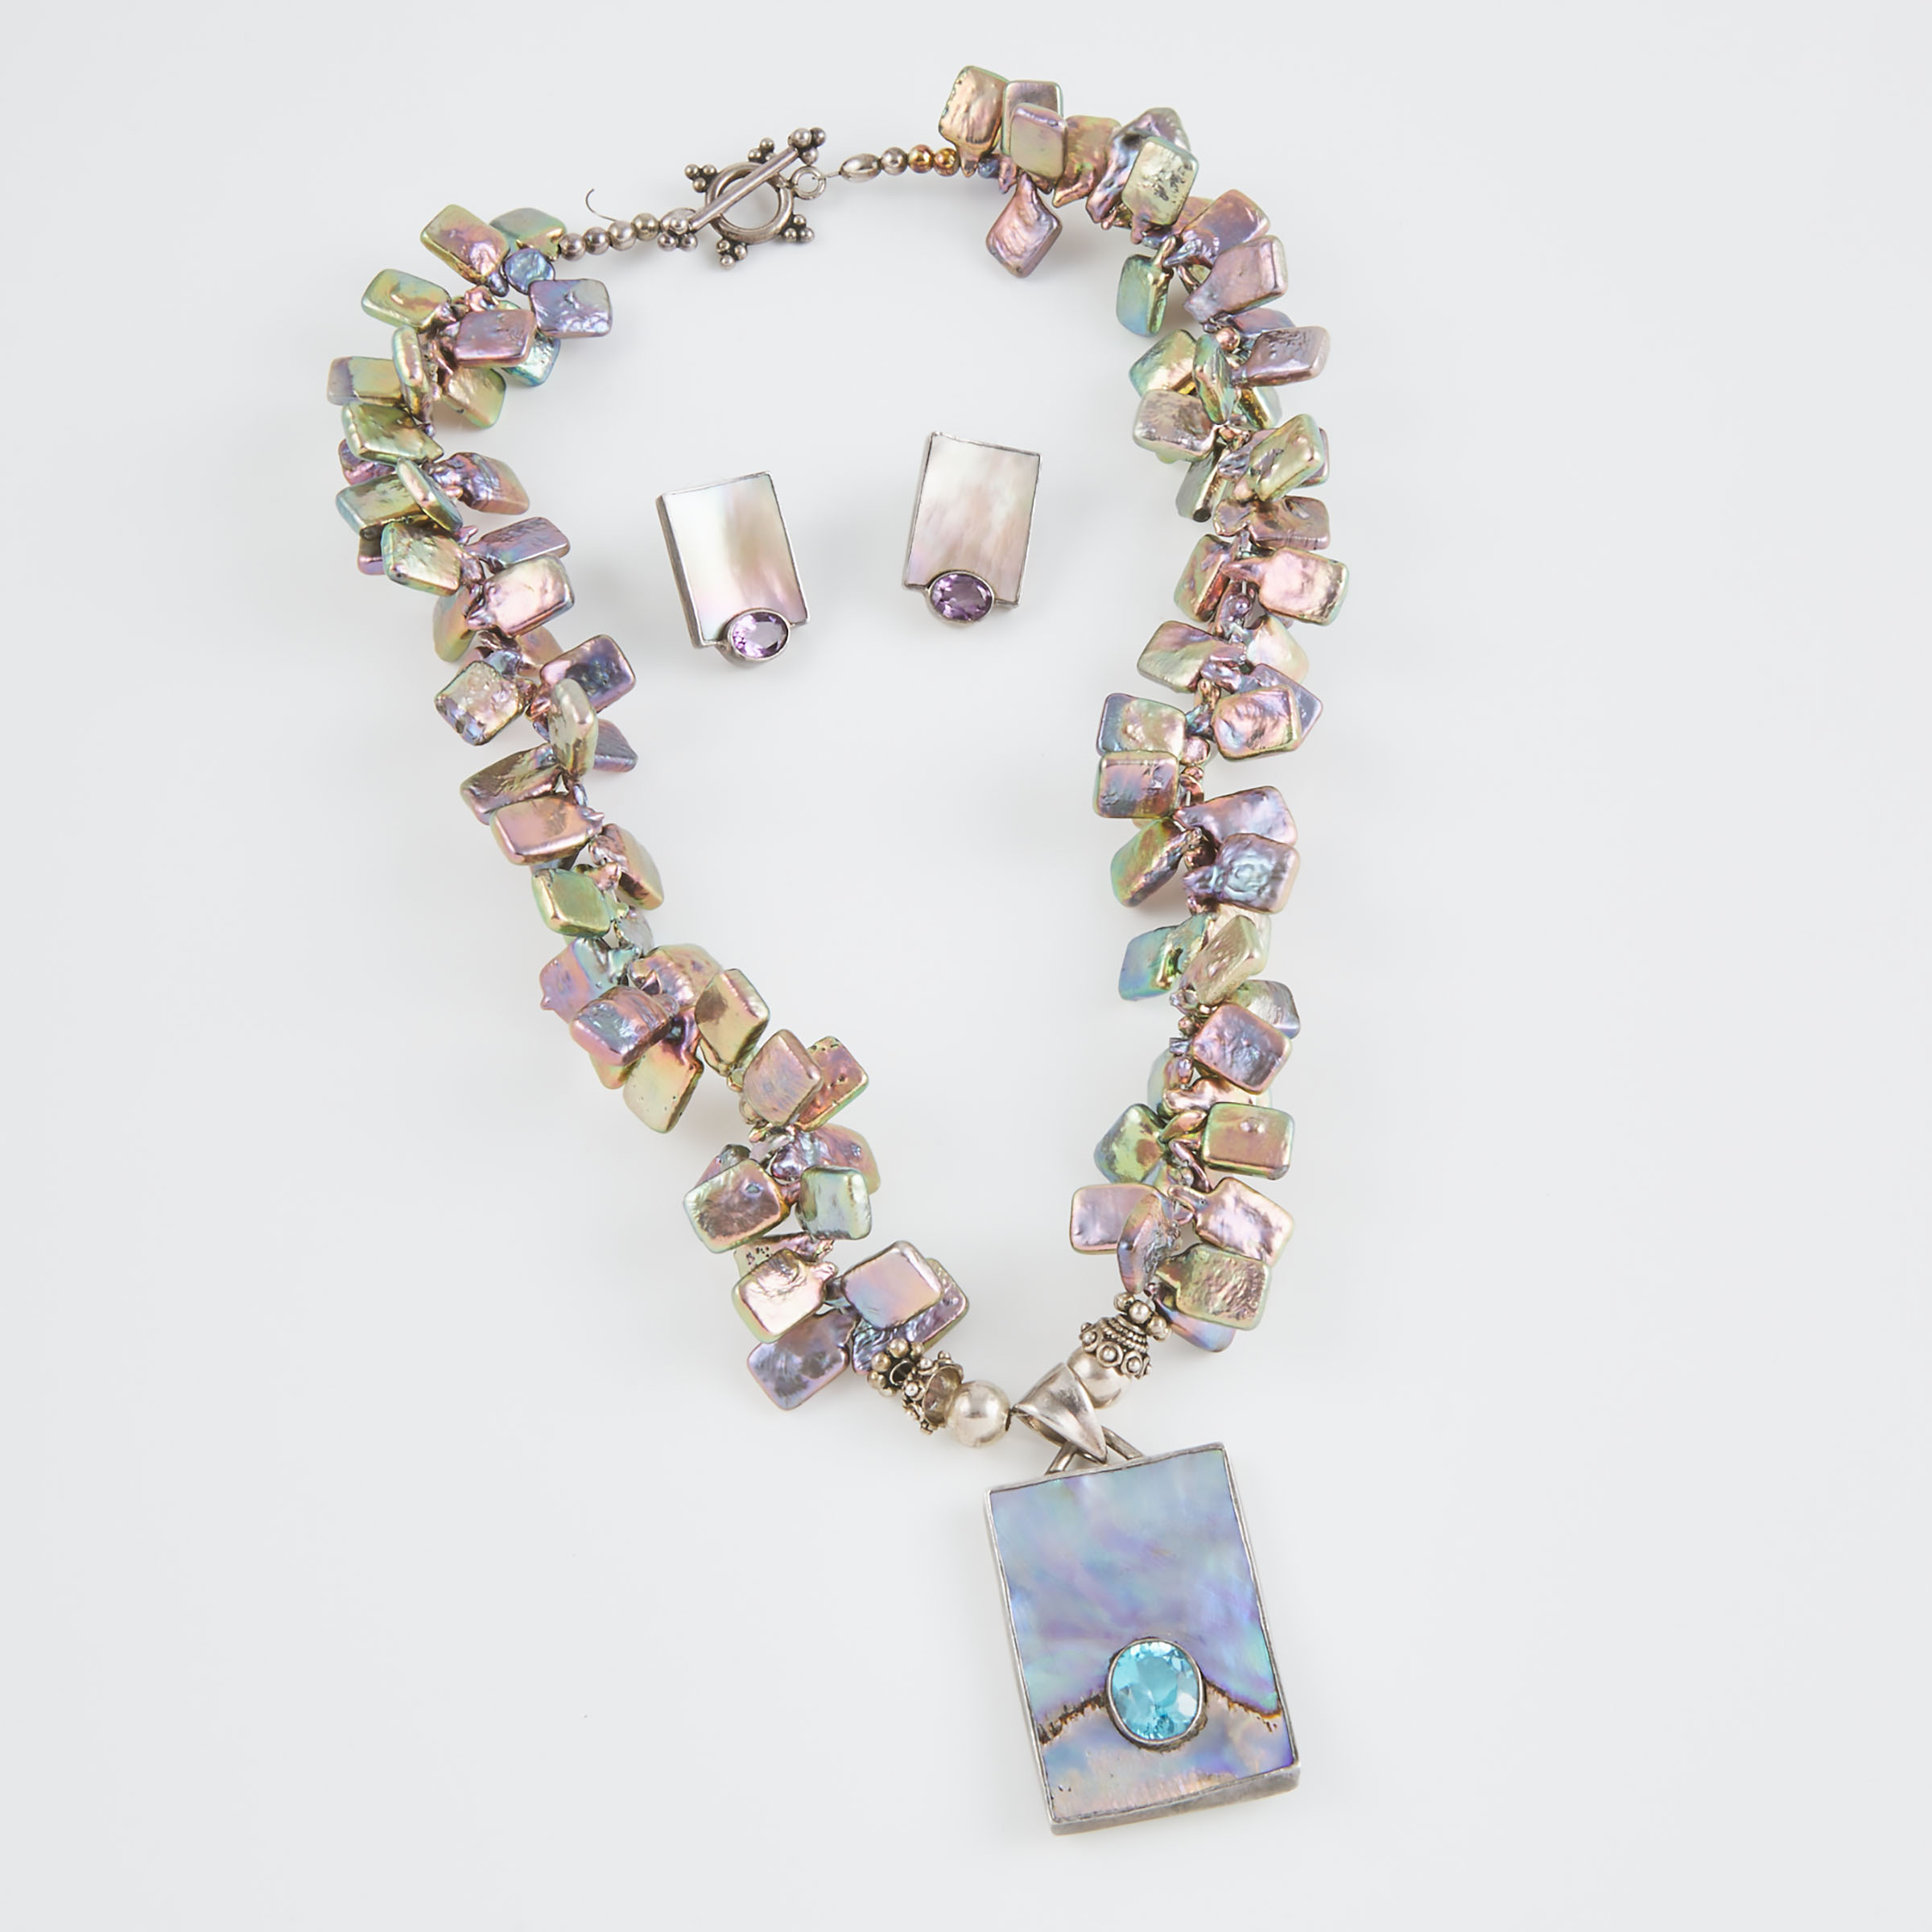 Marta Howell Sterling Silver And Treated Mother-Of-Pearl Necklace And Earrings